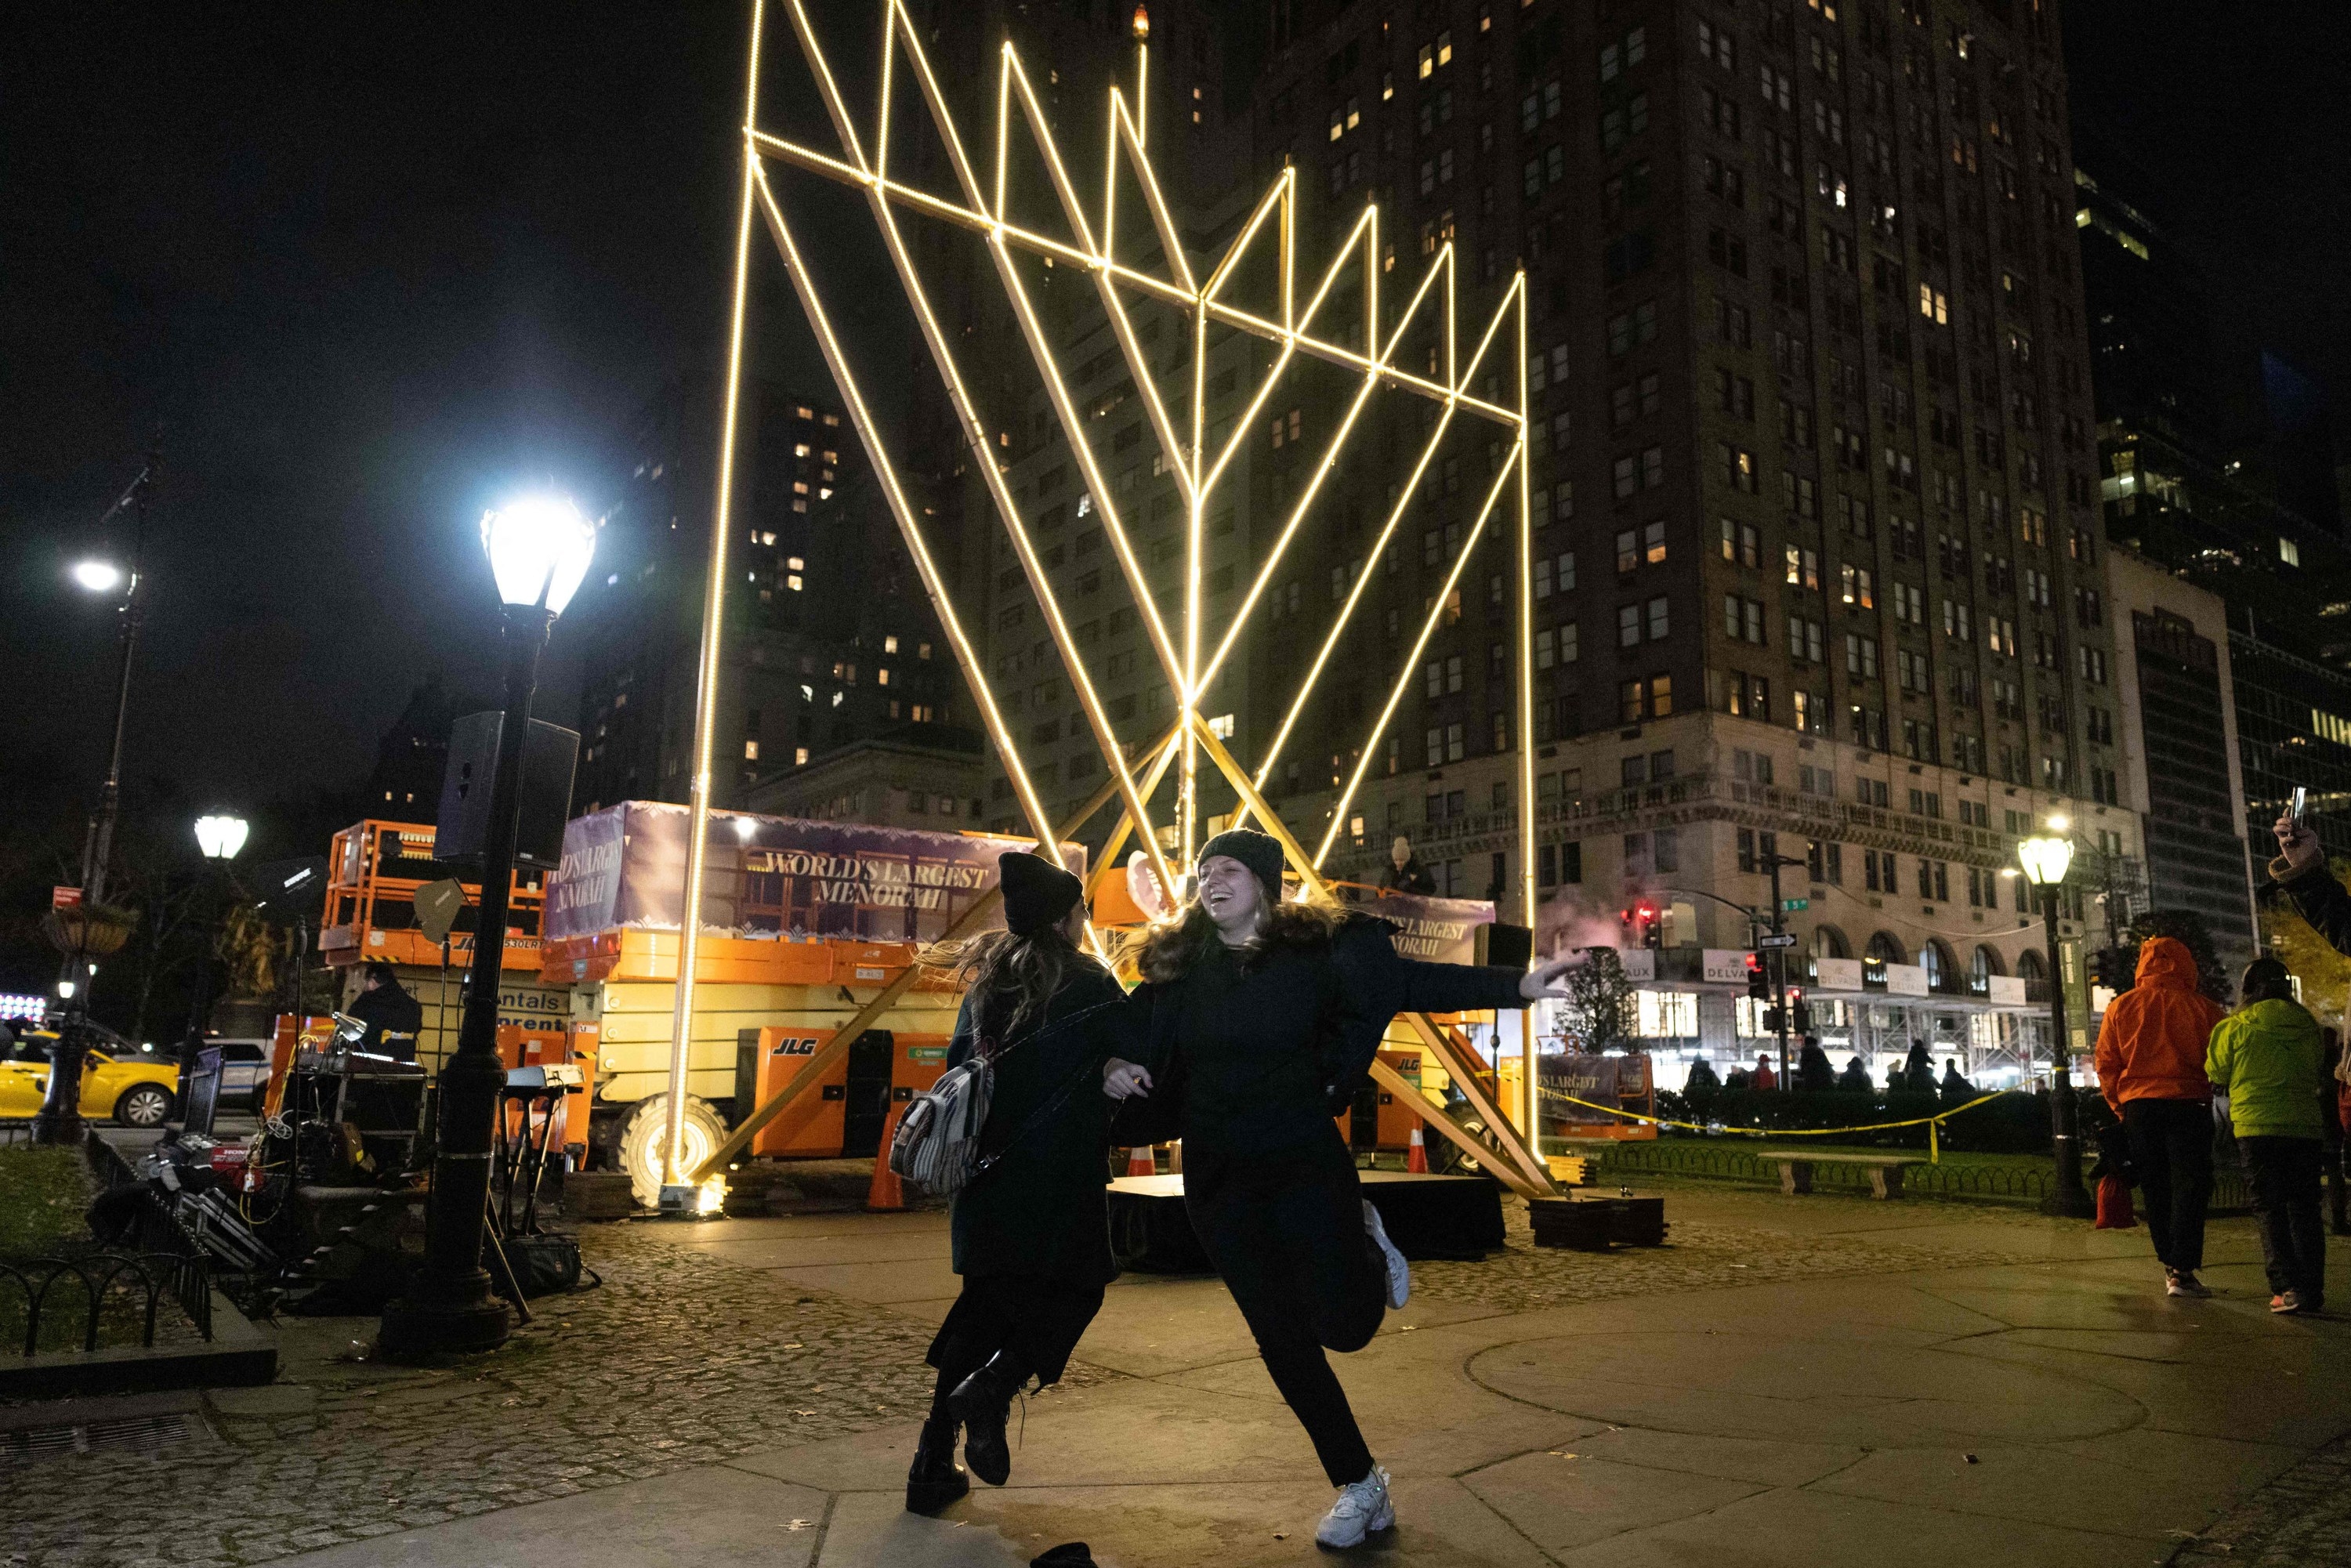 Two people dancing in front of a large menorah 